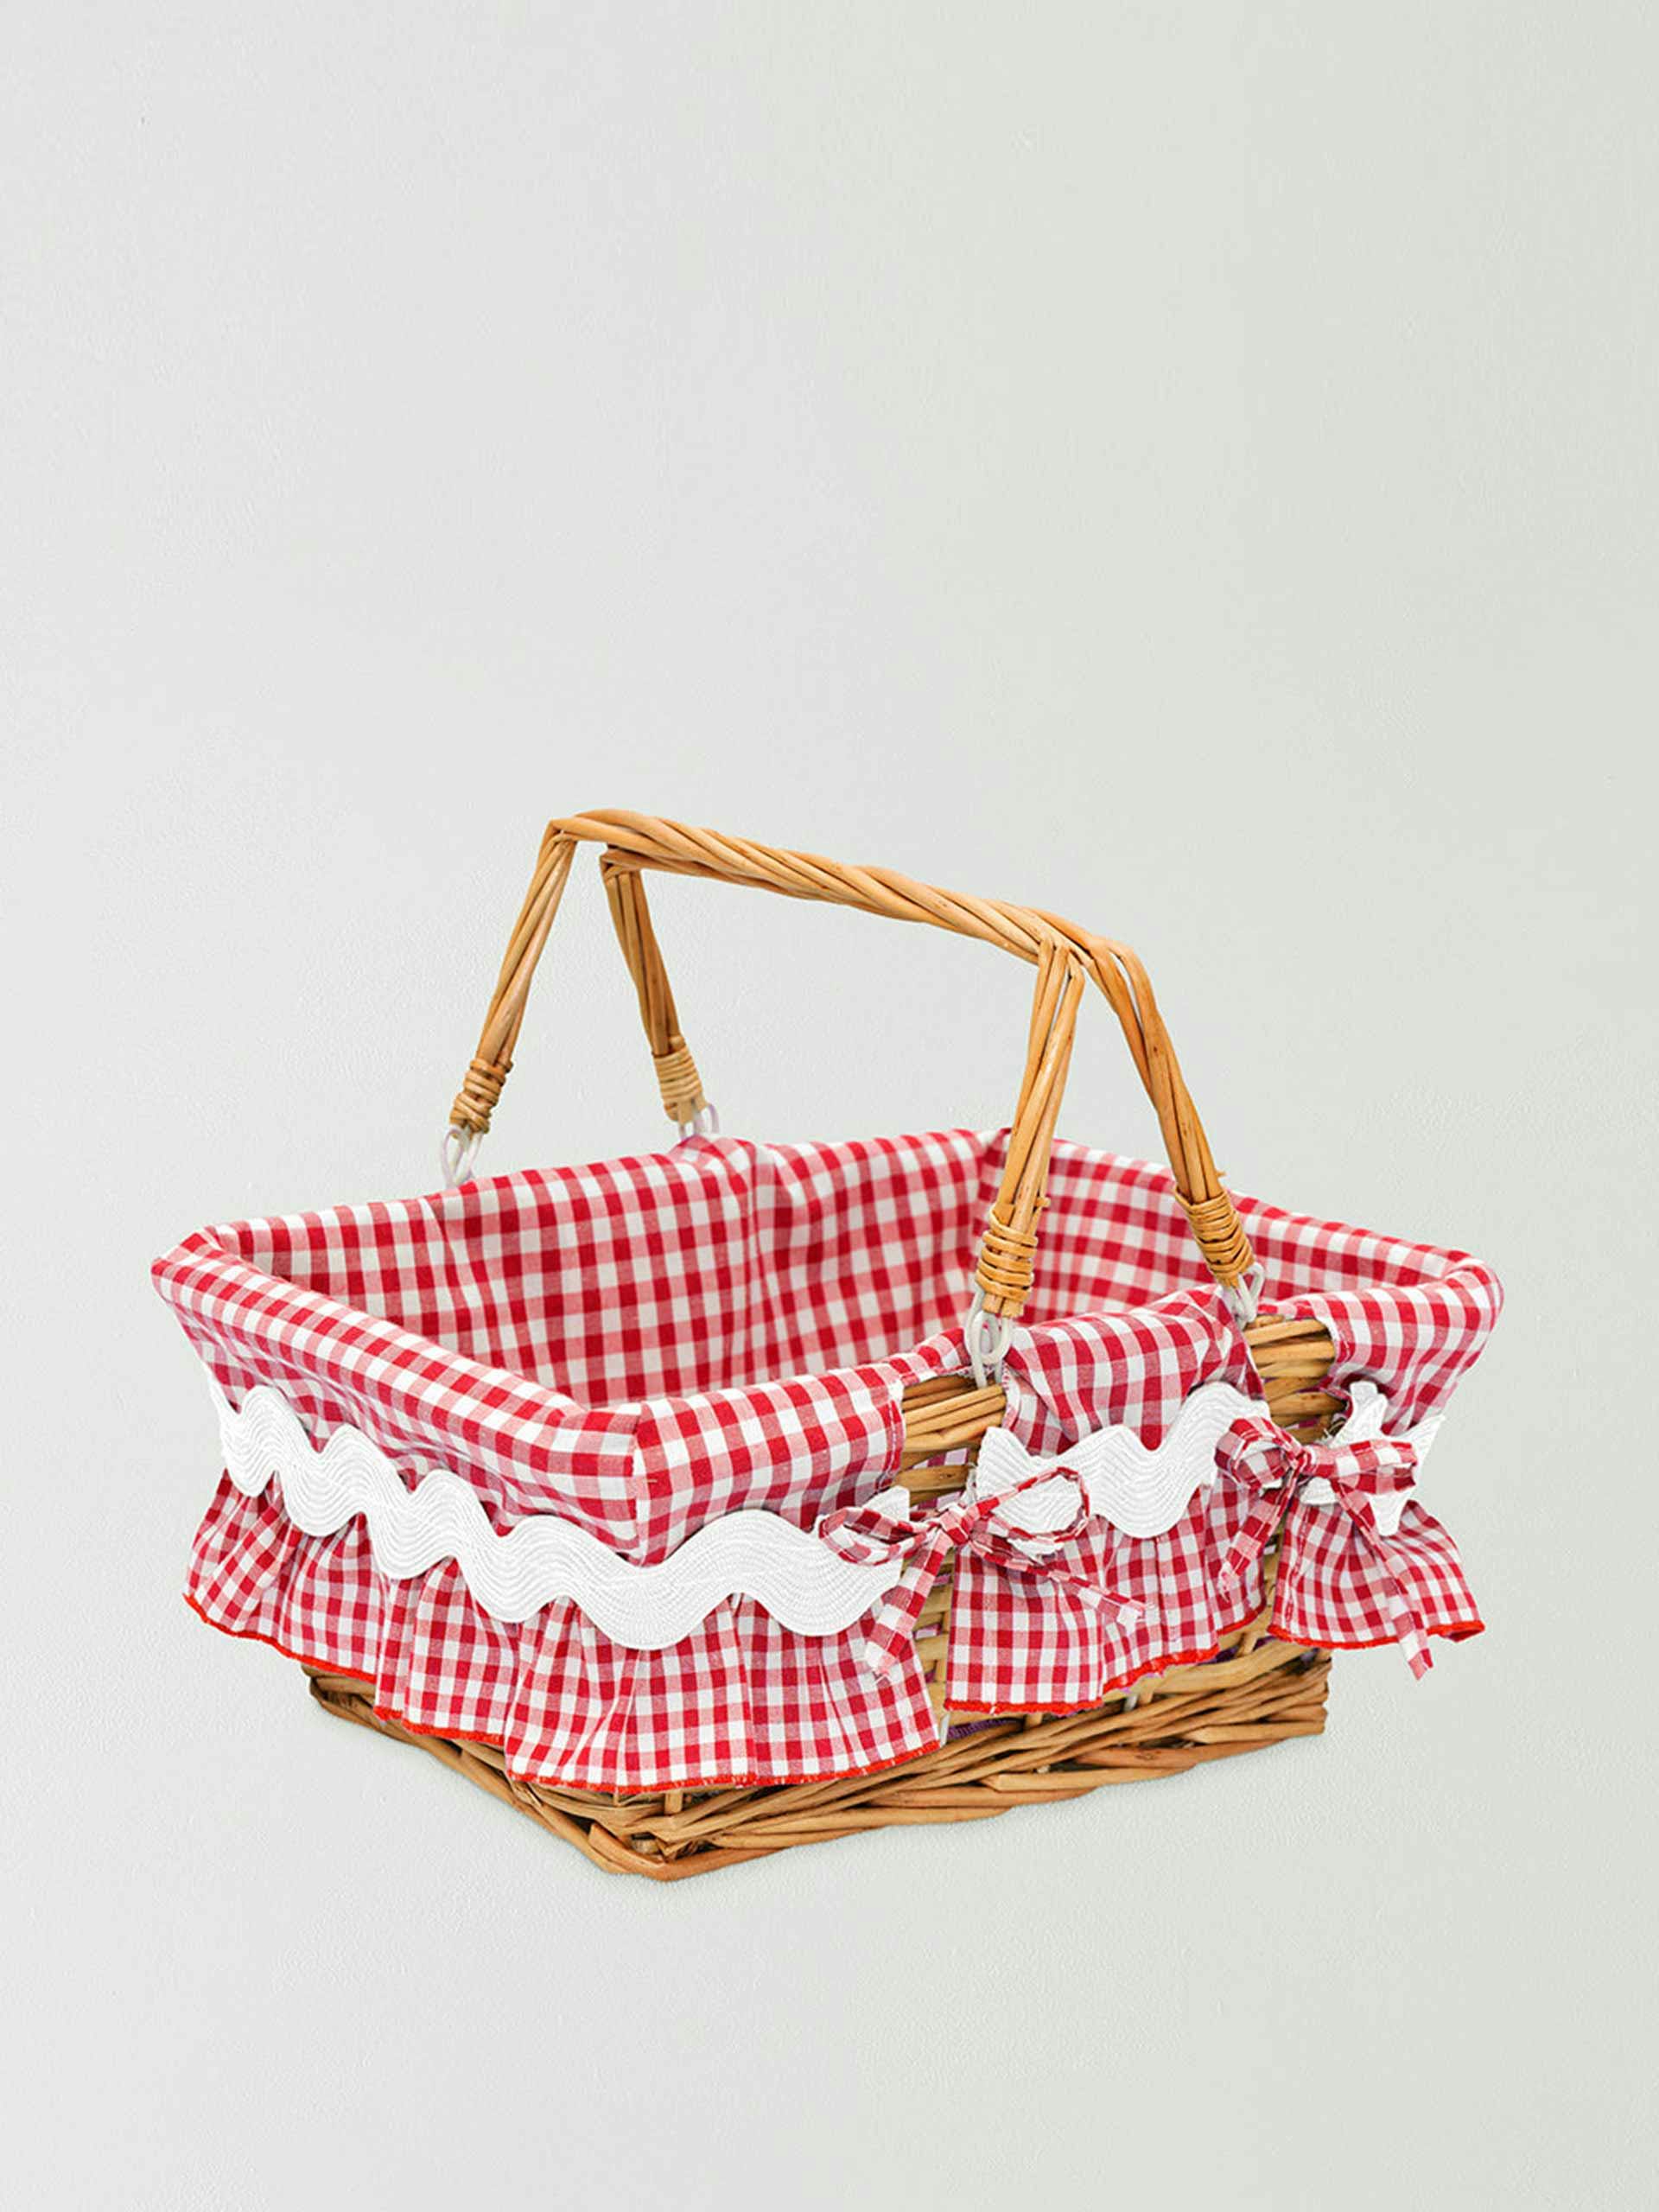 Picnic basket with red gingham lining